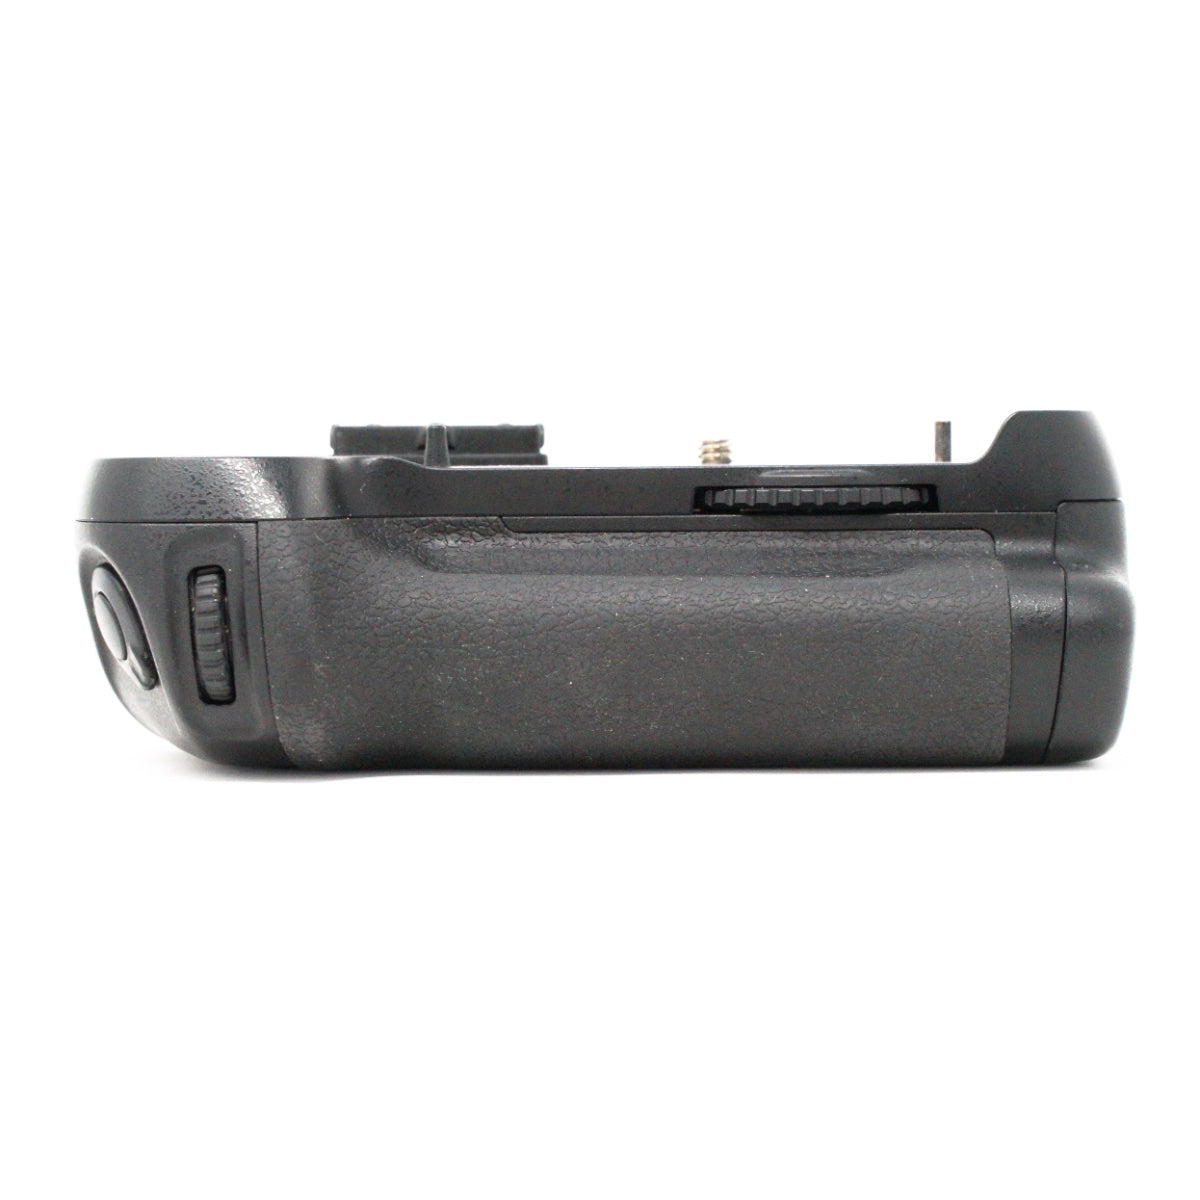 Used MB-D12 Battery Grip with MS-D12 Battery Tray